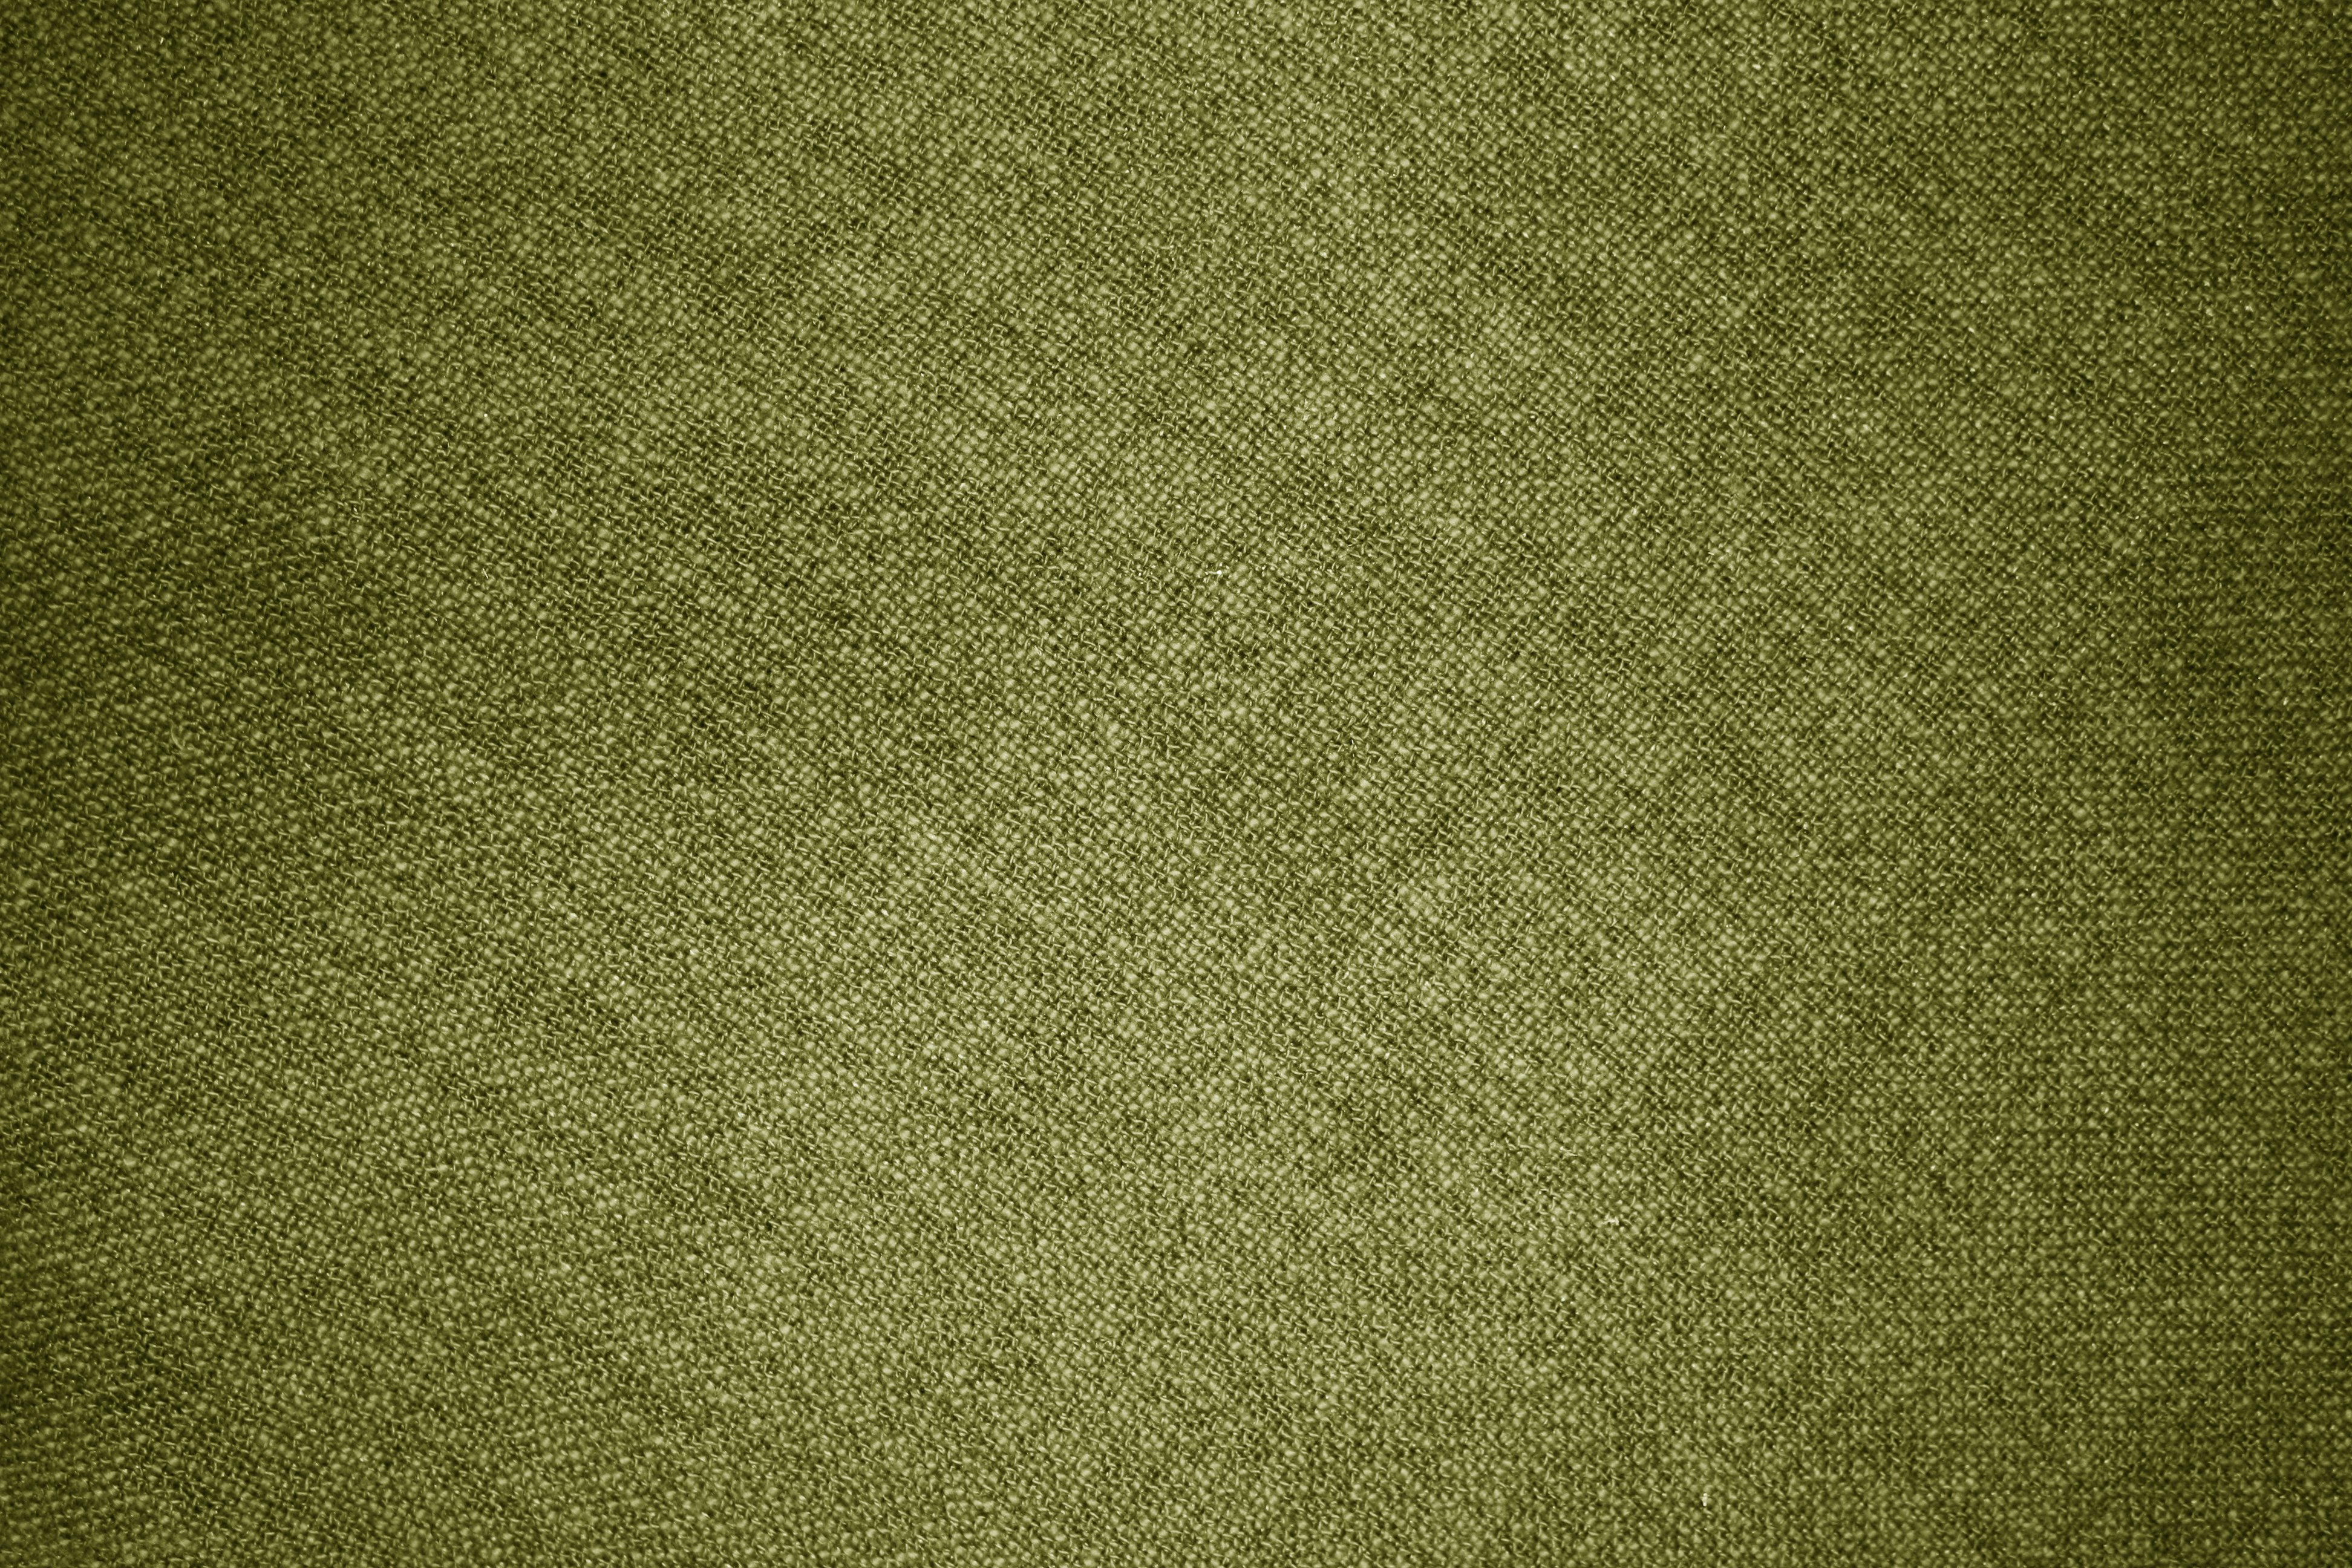 Olive Green Fabric Texture Picture | Free Photograph | Photos Public Domain